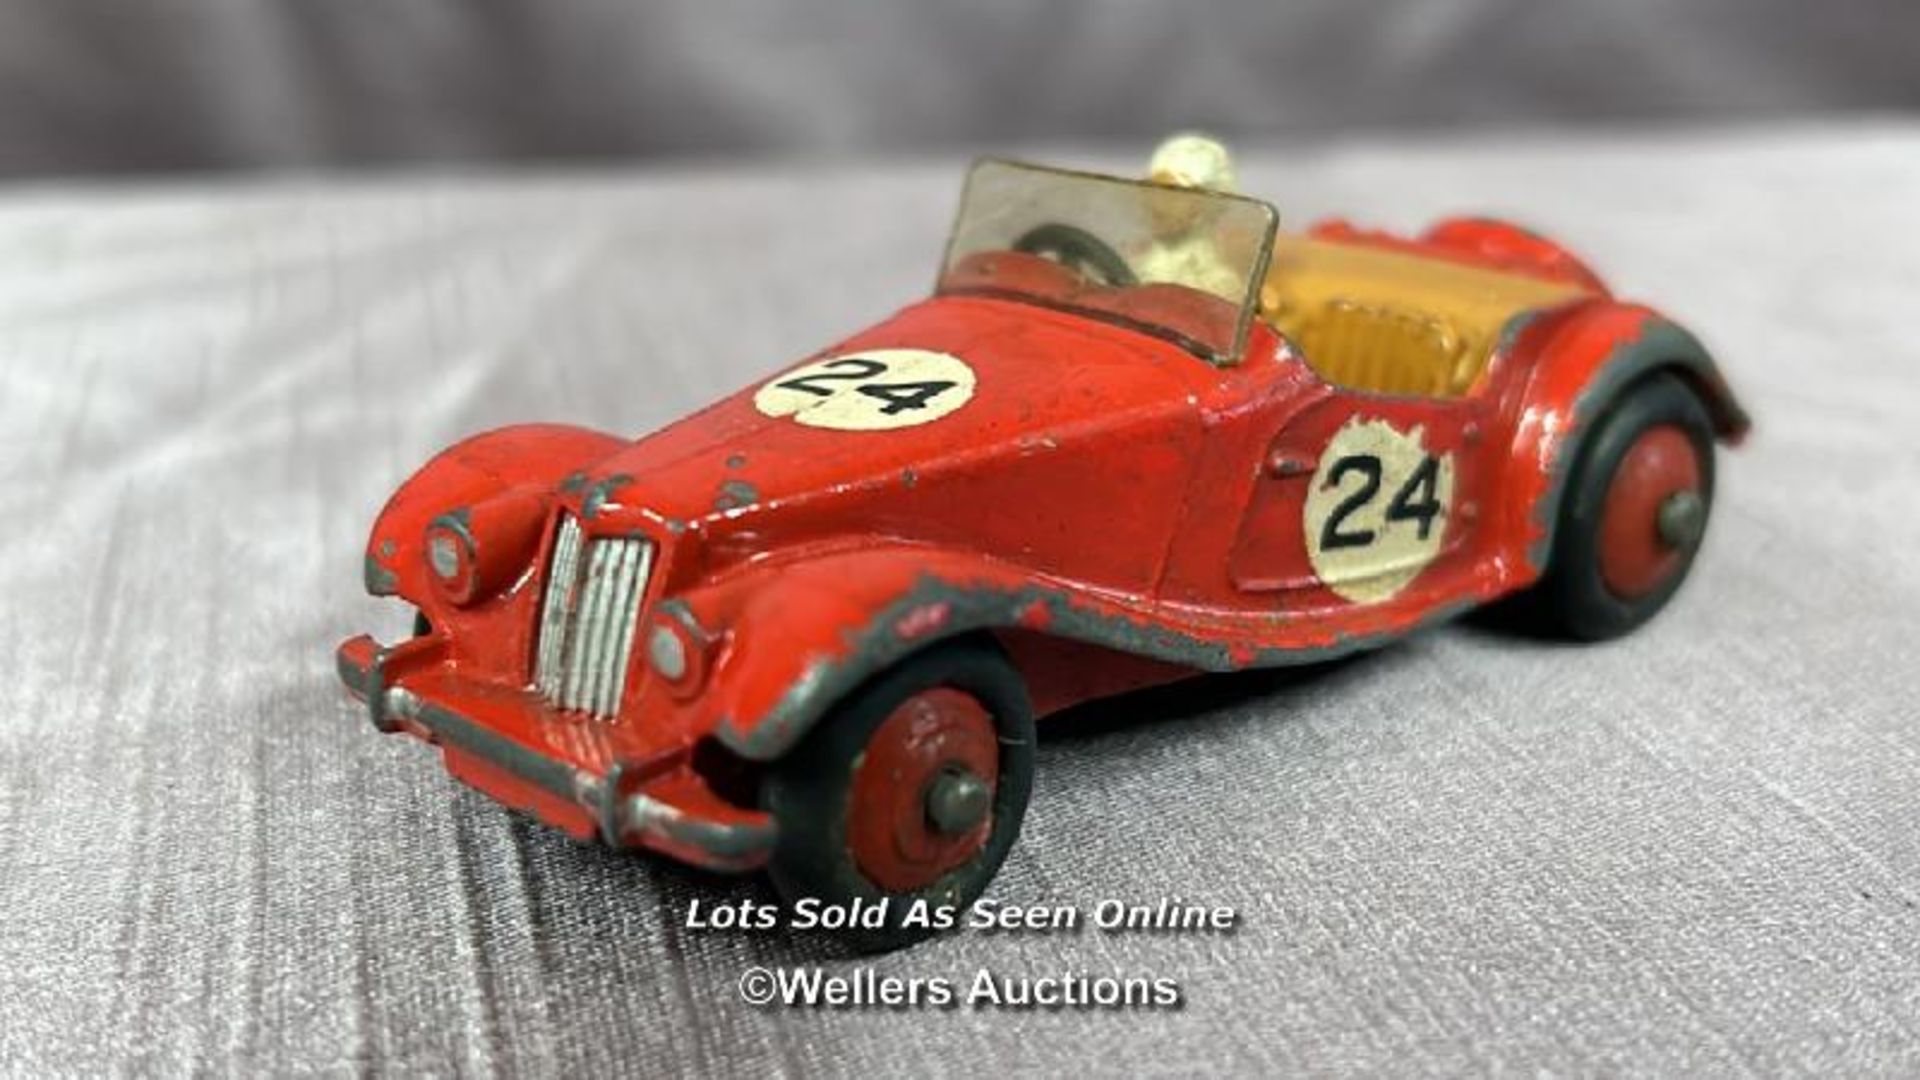 TWO DINKY DIE CAST RACING CARS INCLUDING MG MIDGET NO. 108 AND AUSTIN HEALEY NO. 109 - Image 7 of 7